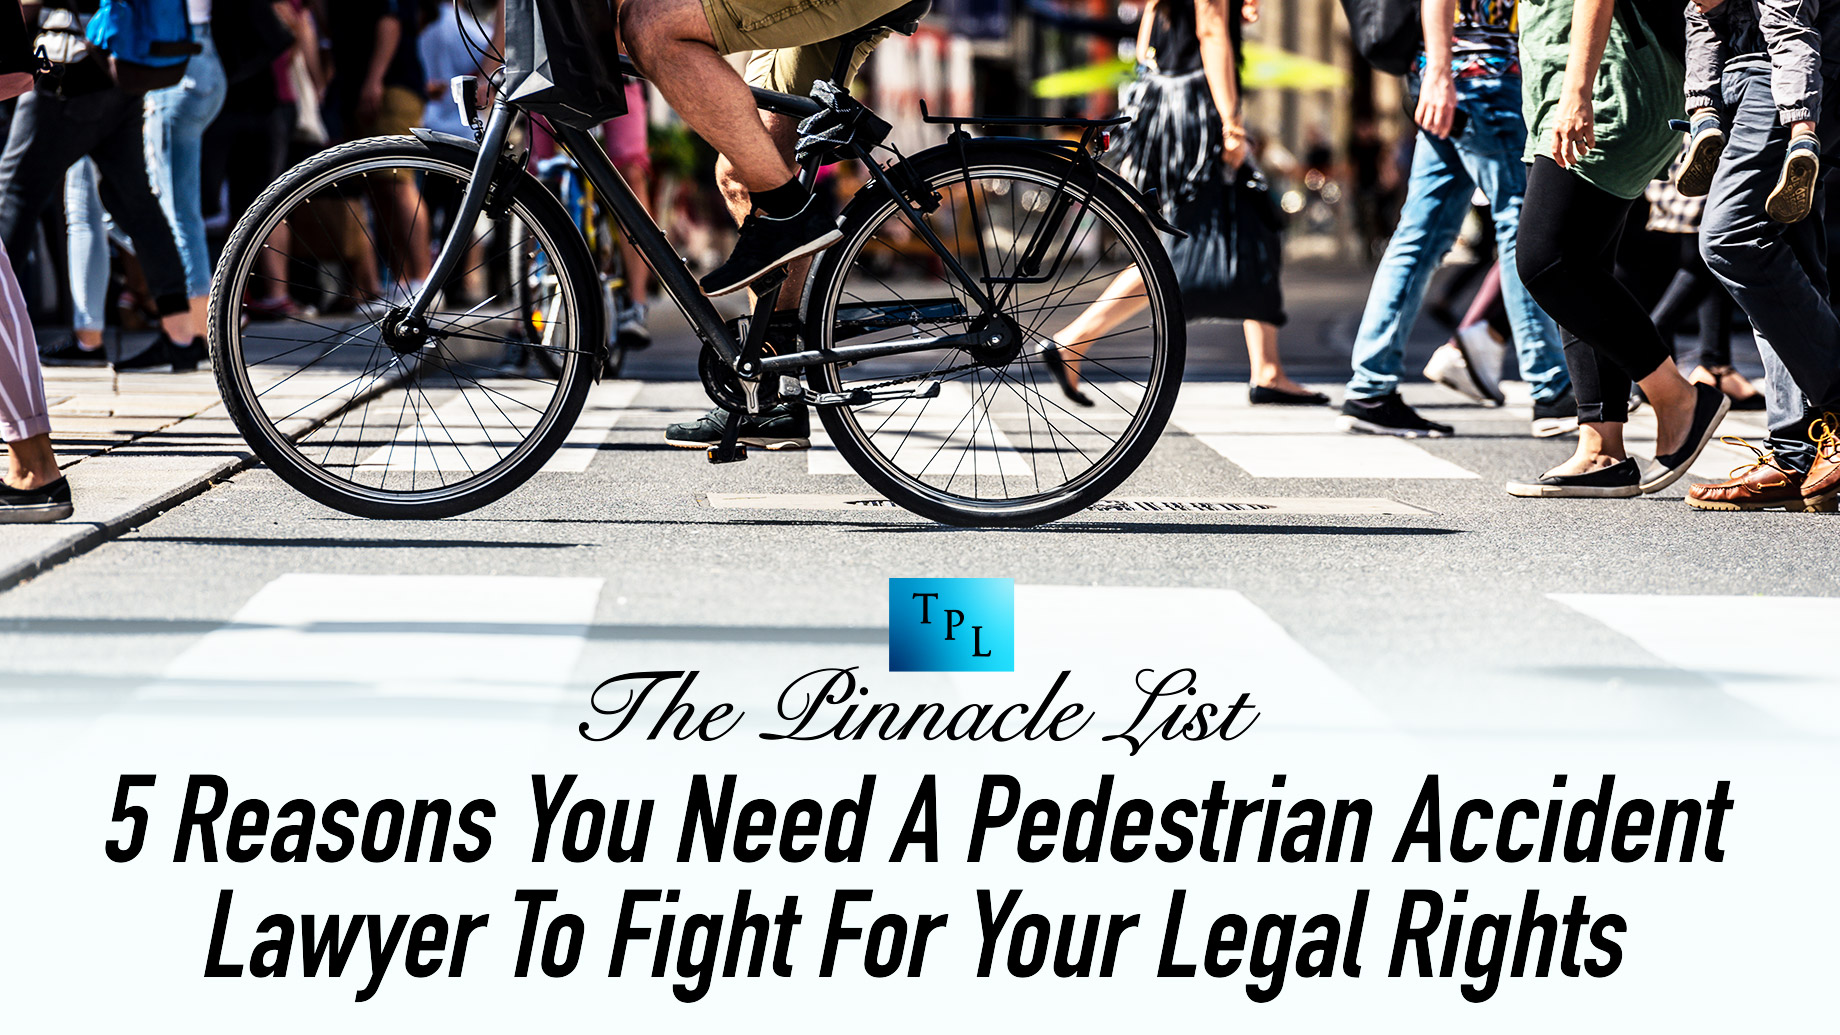 5 Reasons You Need A Pedestrian Accident
Lawyer To Fight For Your Legal Rights